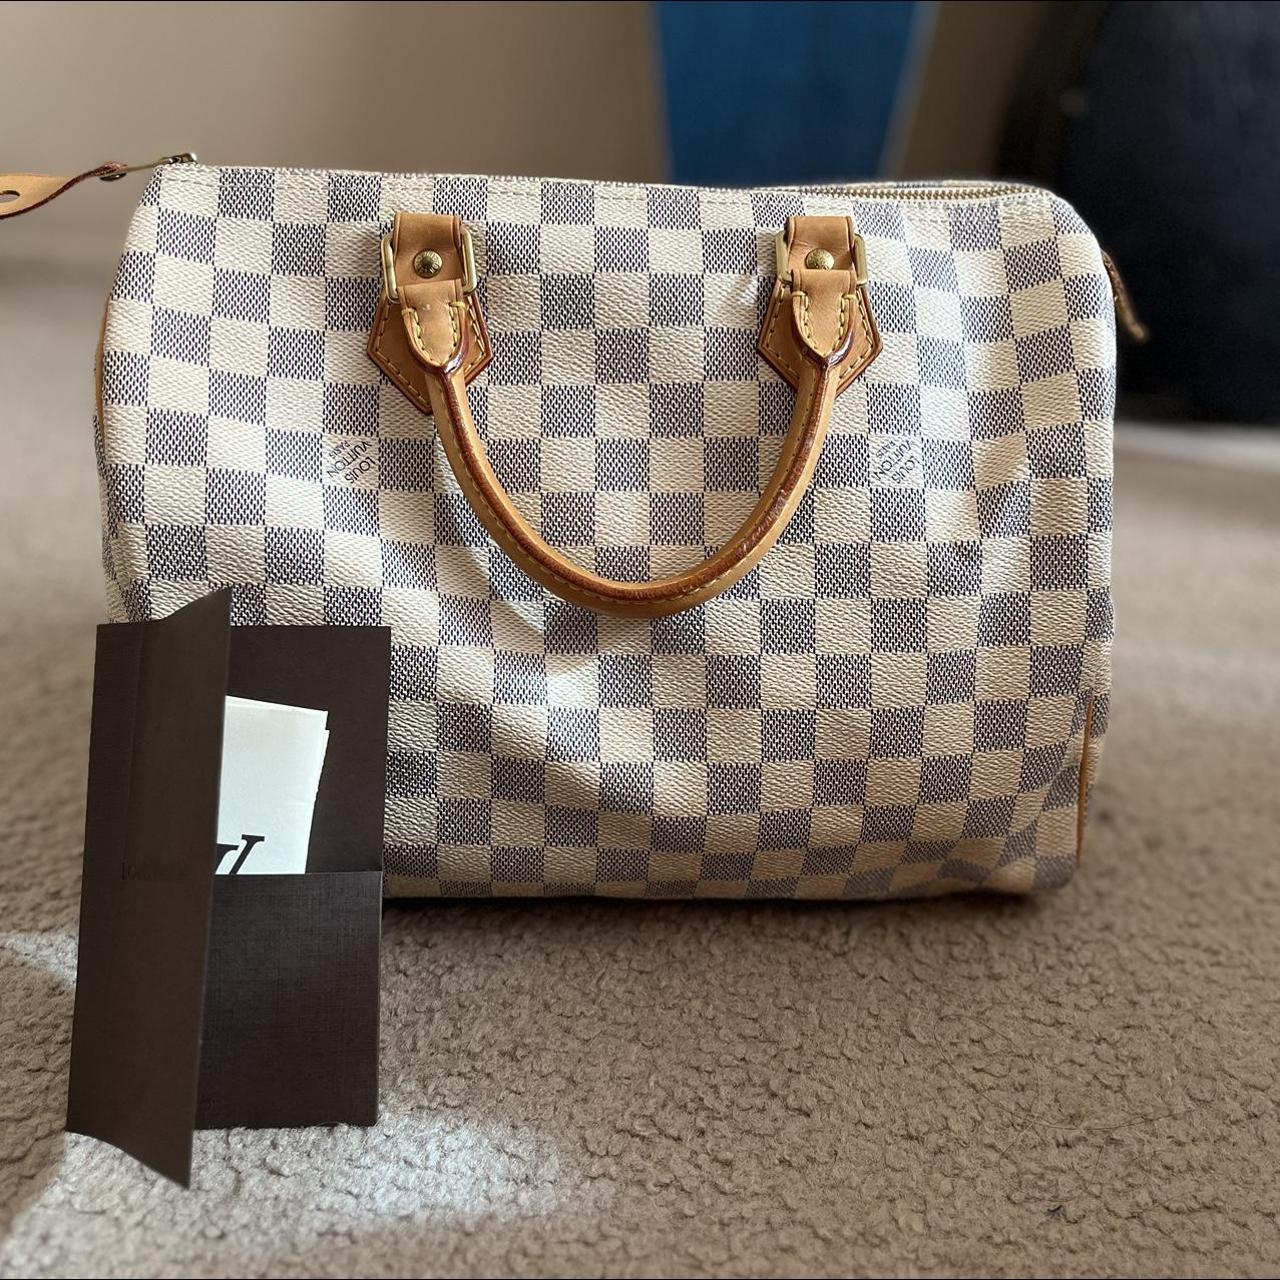 Louis Vuitton Eva Clutch Purchased in 2013 from the - Depop